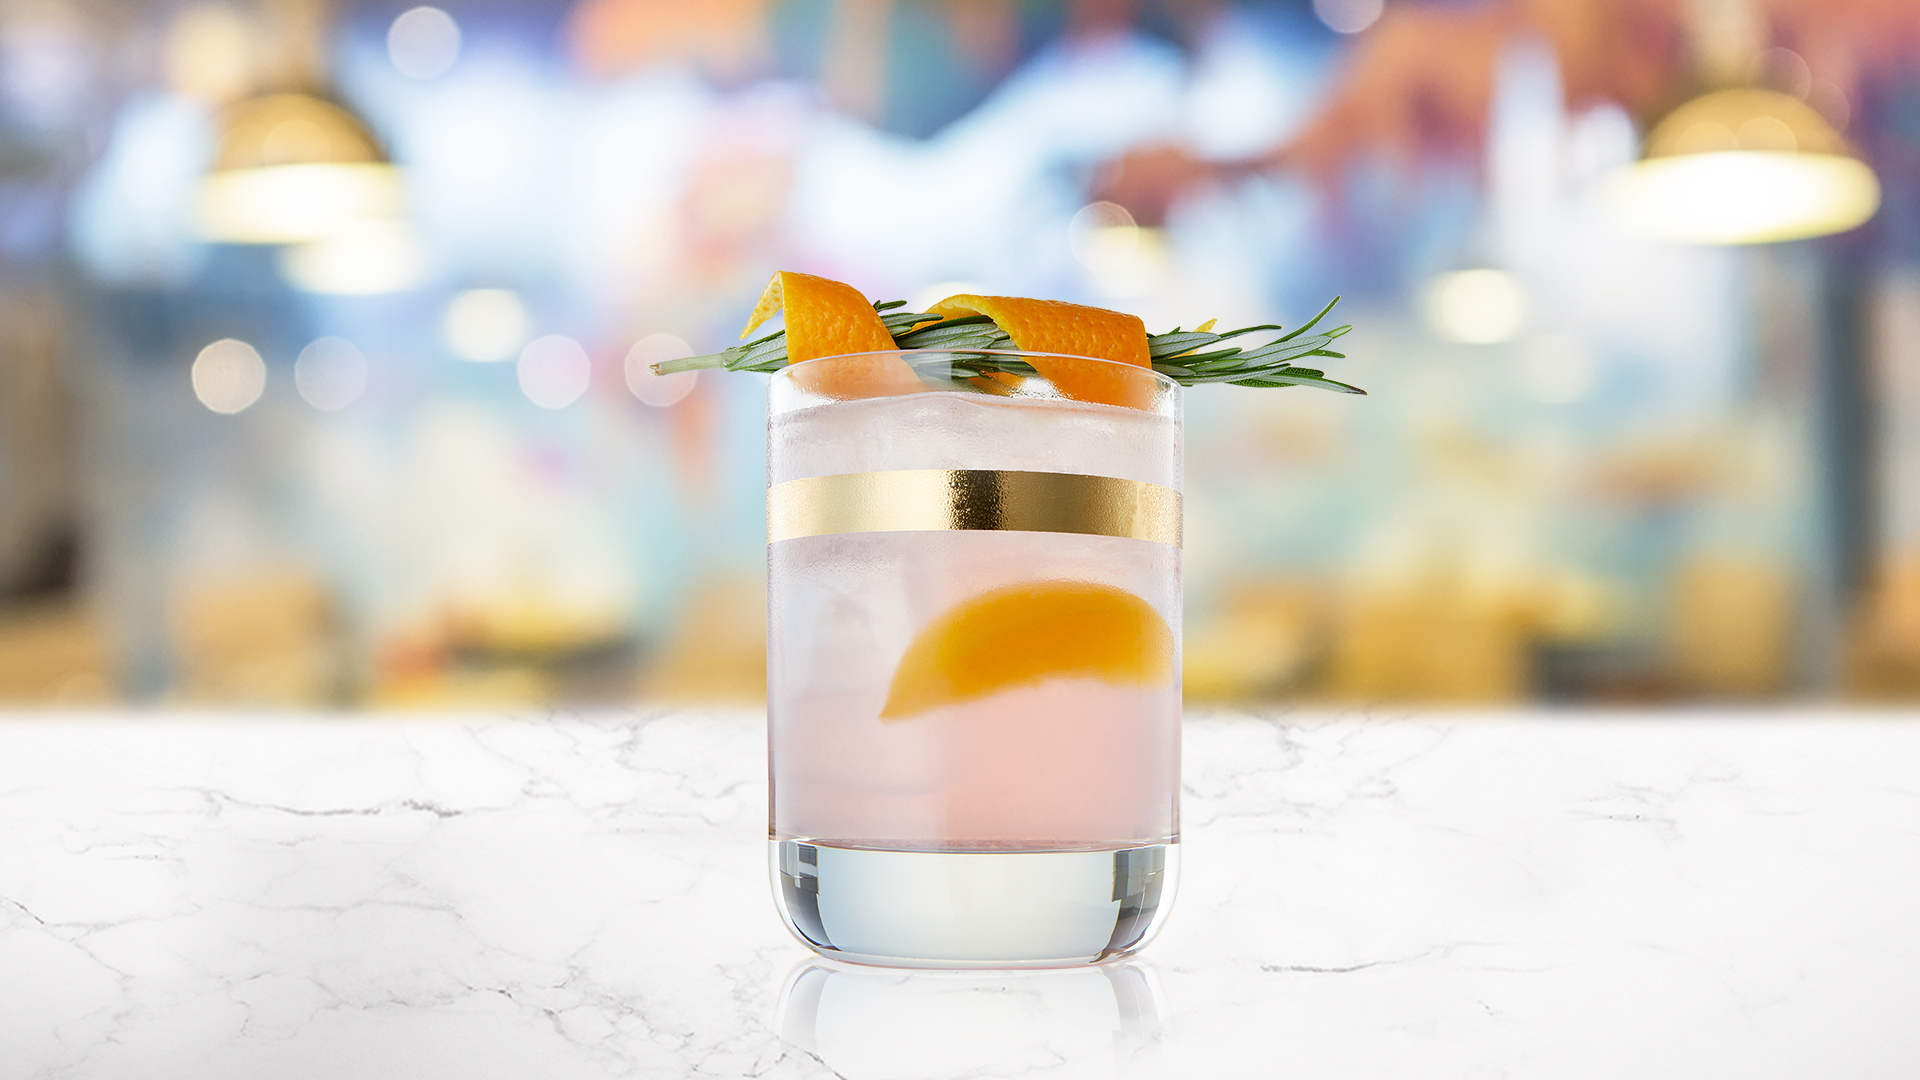 Glass of Grapefruit paradise on a marble surface